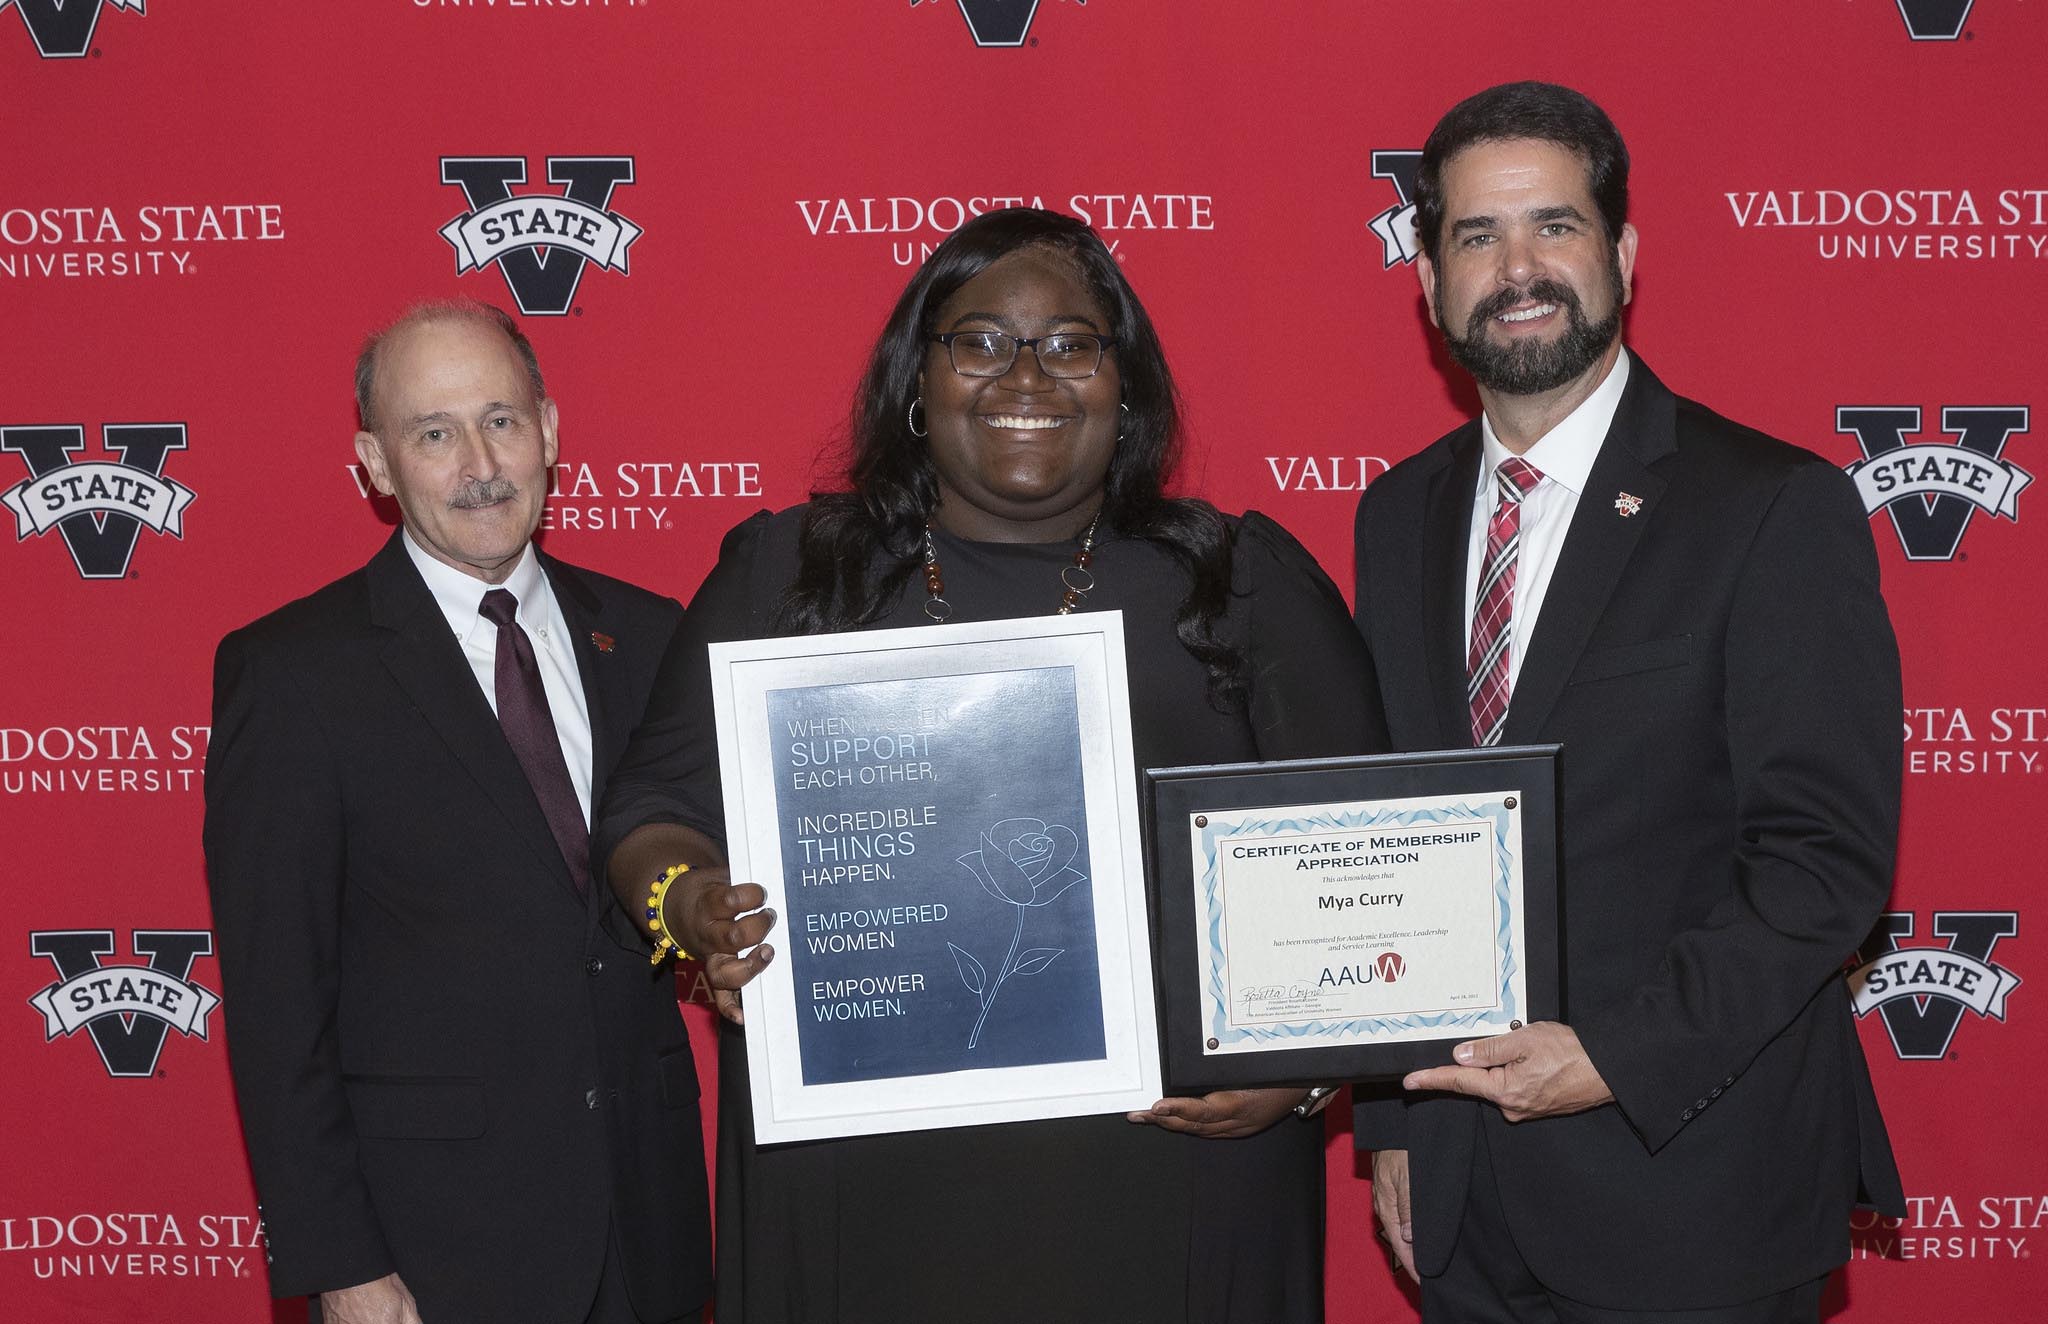 Mya Curry of Blackshear, Georgia, is the recipient of the 2022 American Association of University Women Award at Valdosta State University. She graduated summa cum laude with a Bachelor of Science in Middle Grades Education during VSU’s 223rd Commencement Ceremony on May 7. She is pictured with Dr. Robert Smith, provost and vice president for Academic Affairs, and Dr. Richard Carvajal, university president.